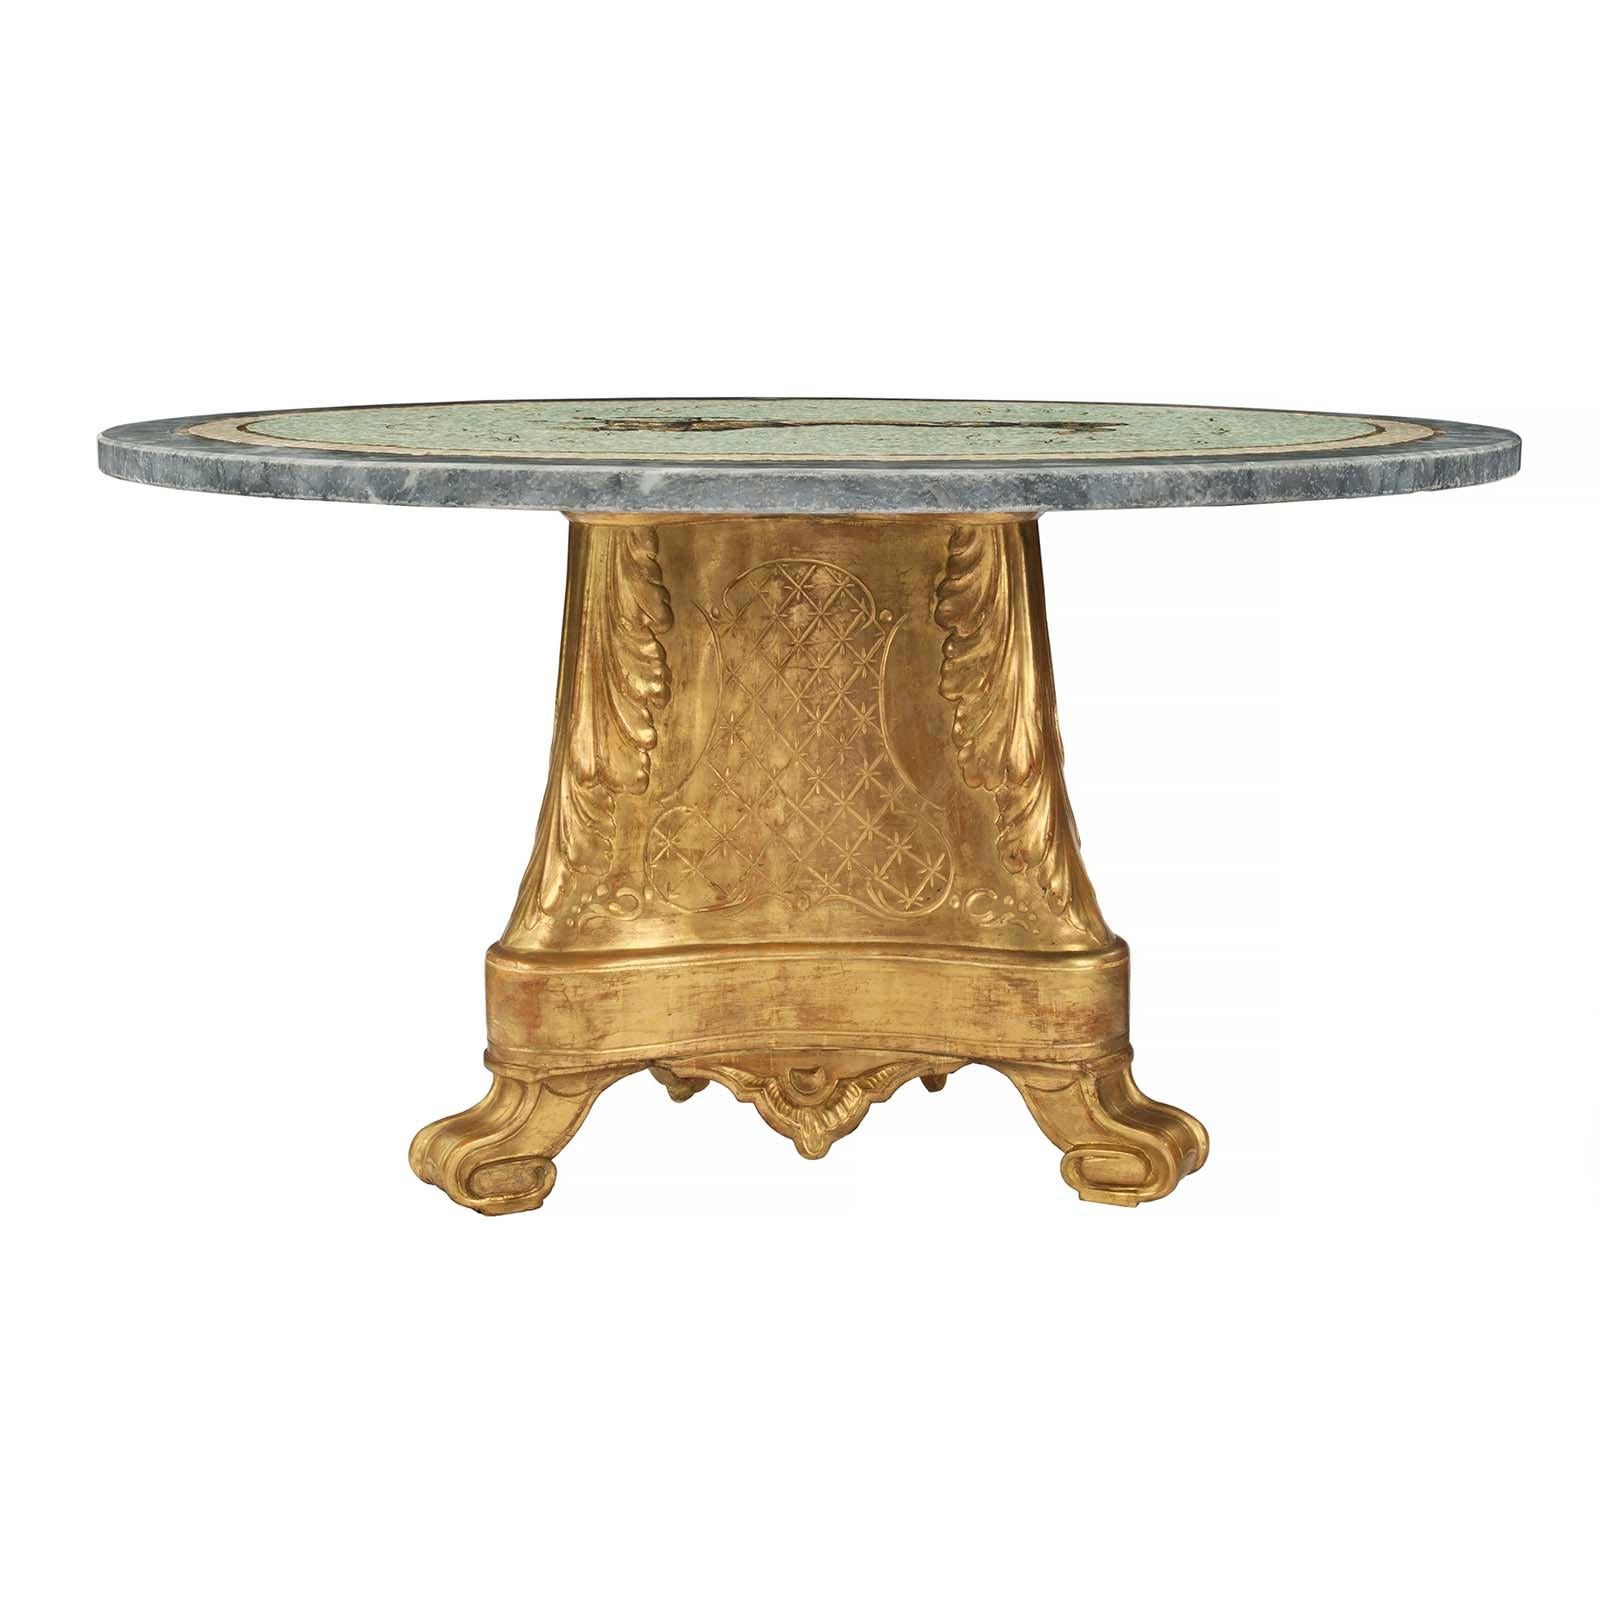 A striking Italian 19th century giltwood, marble and mosaic circular coffee table. The table is raised by a triangular giltwood base with elegantly scrolled feet, concave sides decorated with etched star lattice designs and large acanthus leaves.